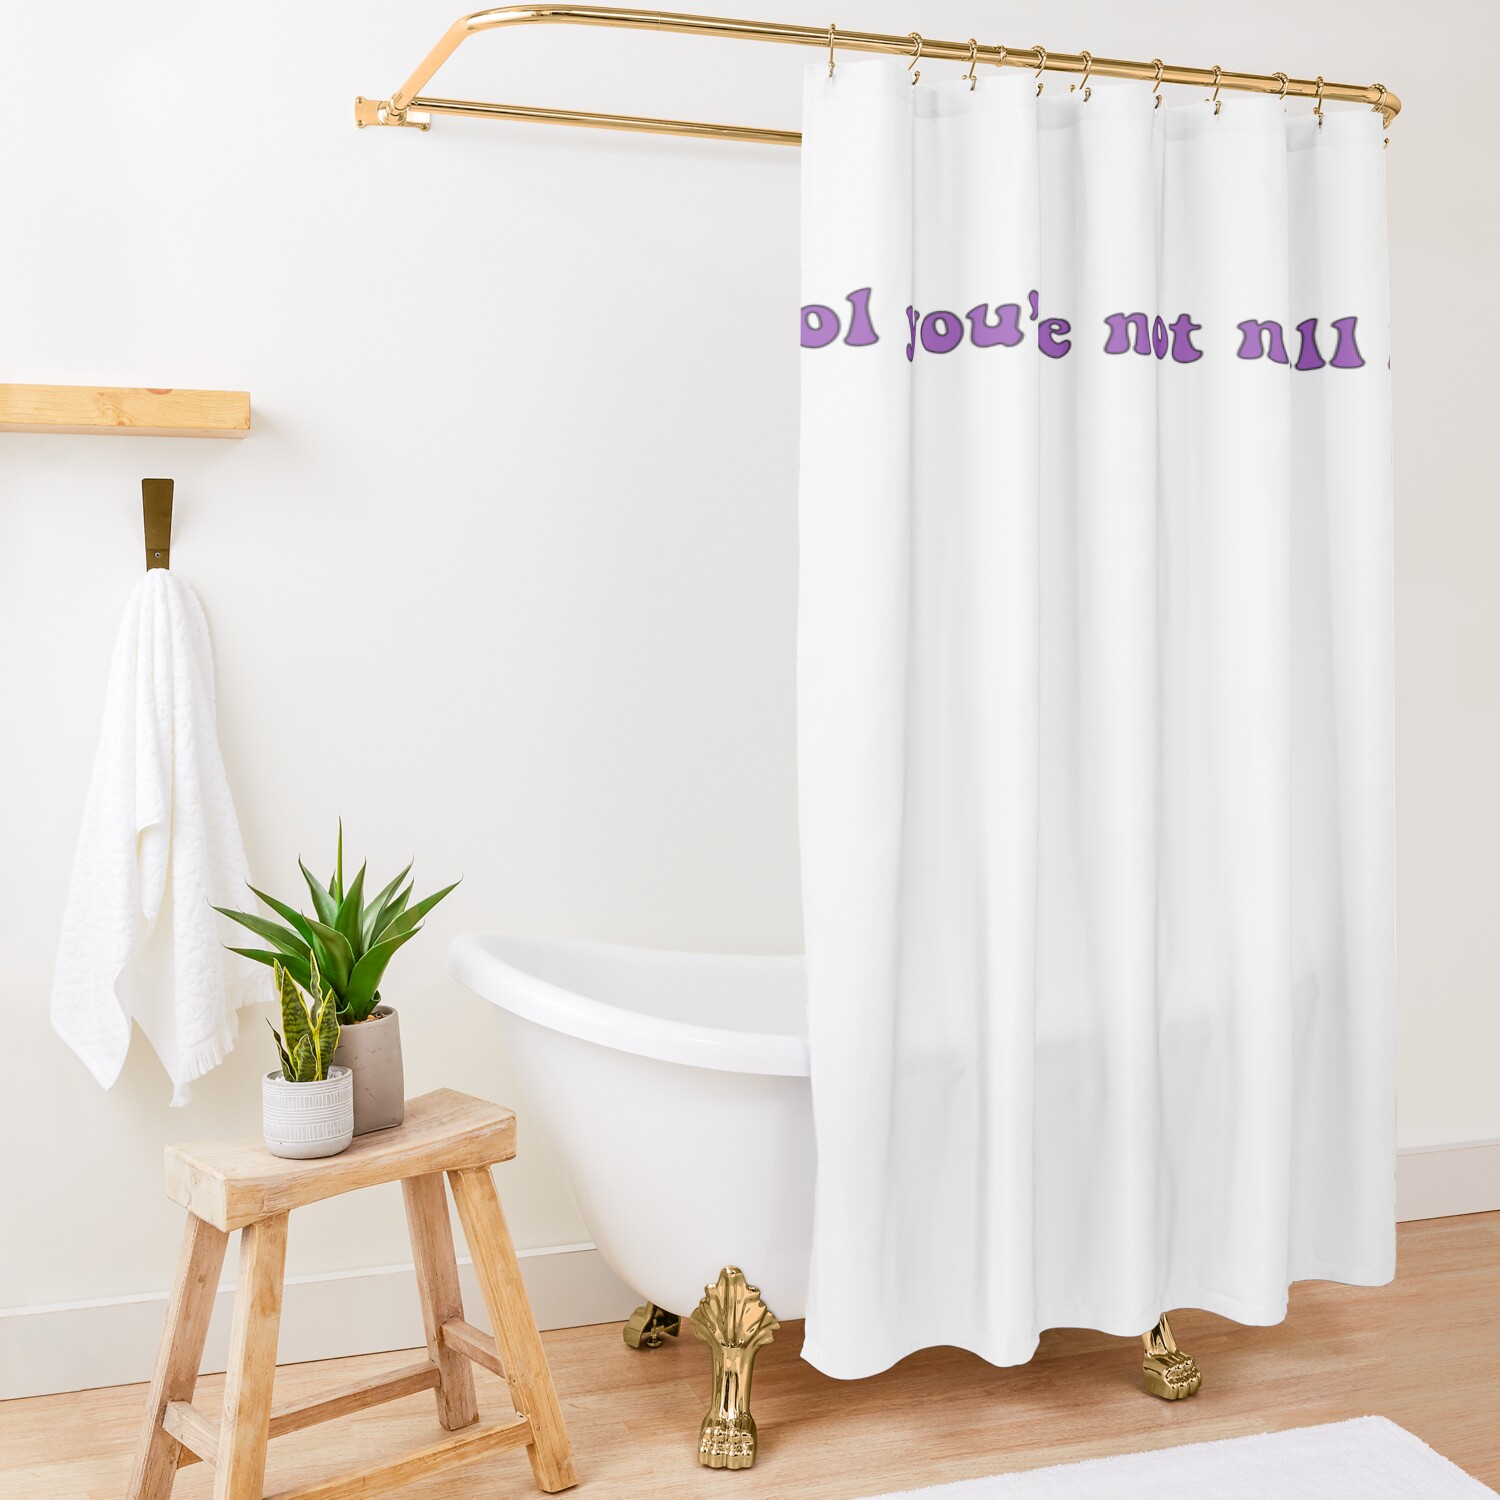 urshower curtain opensquare1500x1500 13 - Niall Horan Shop